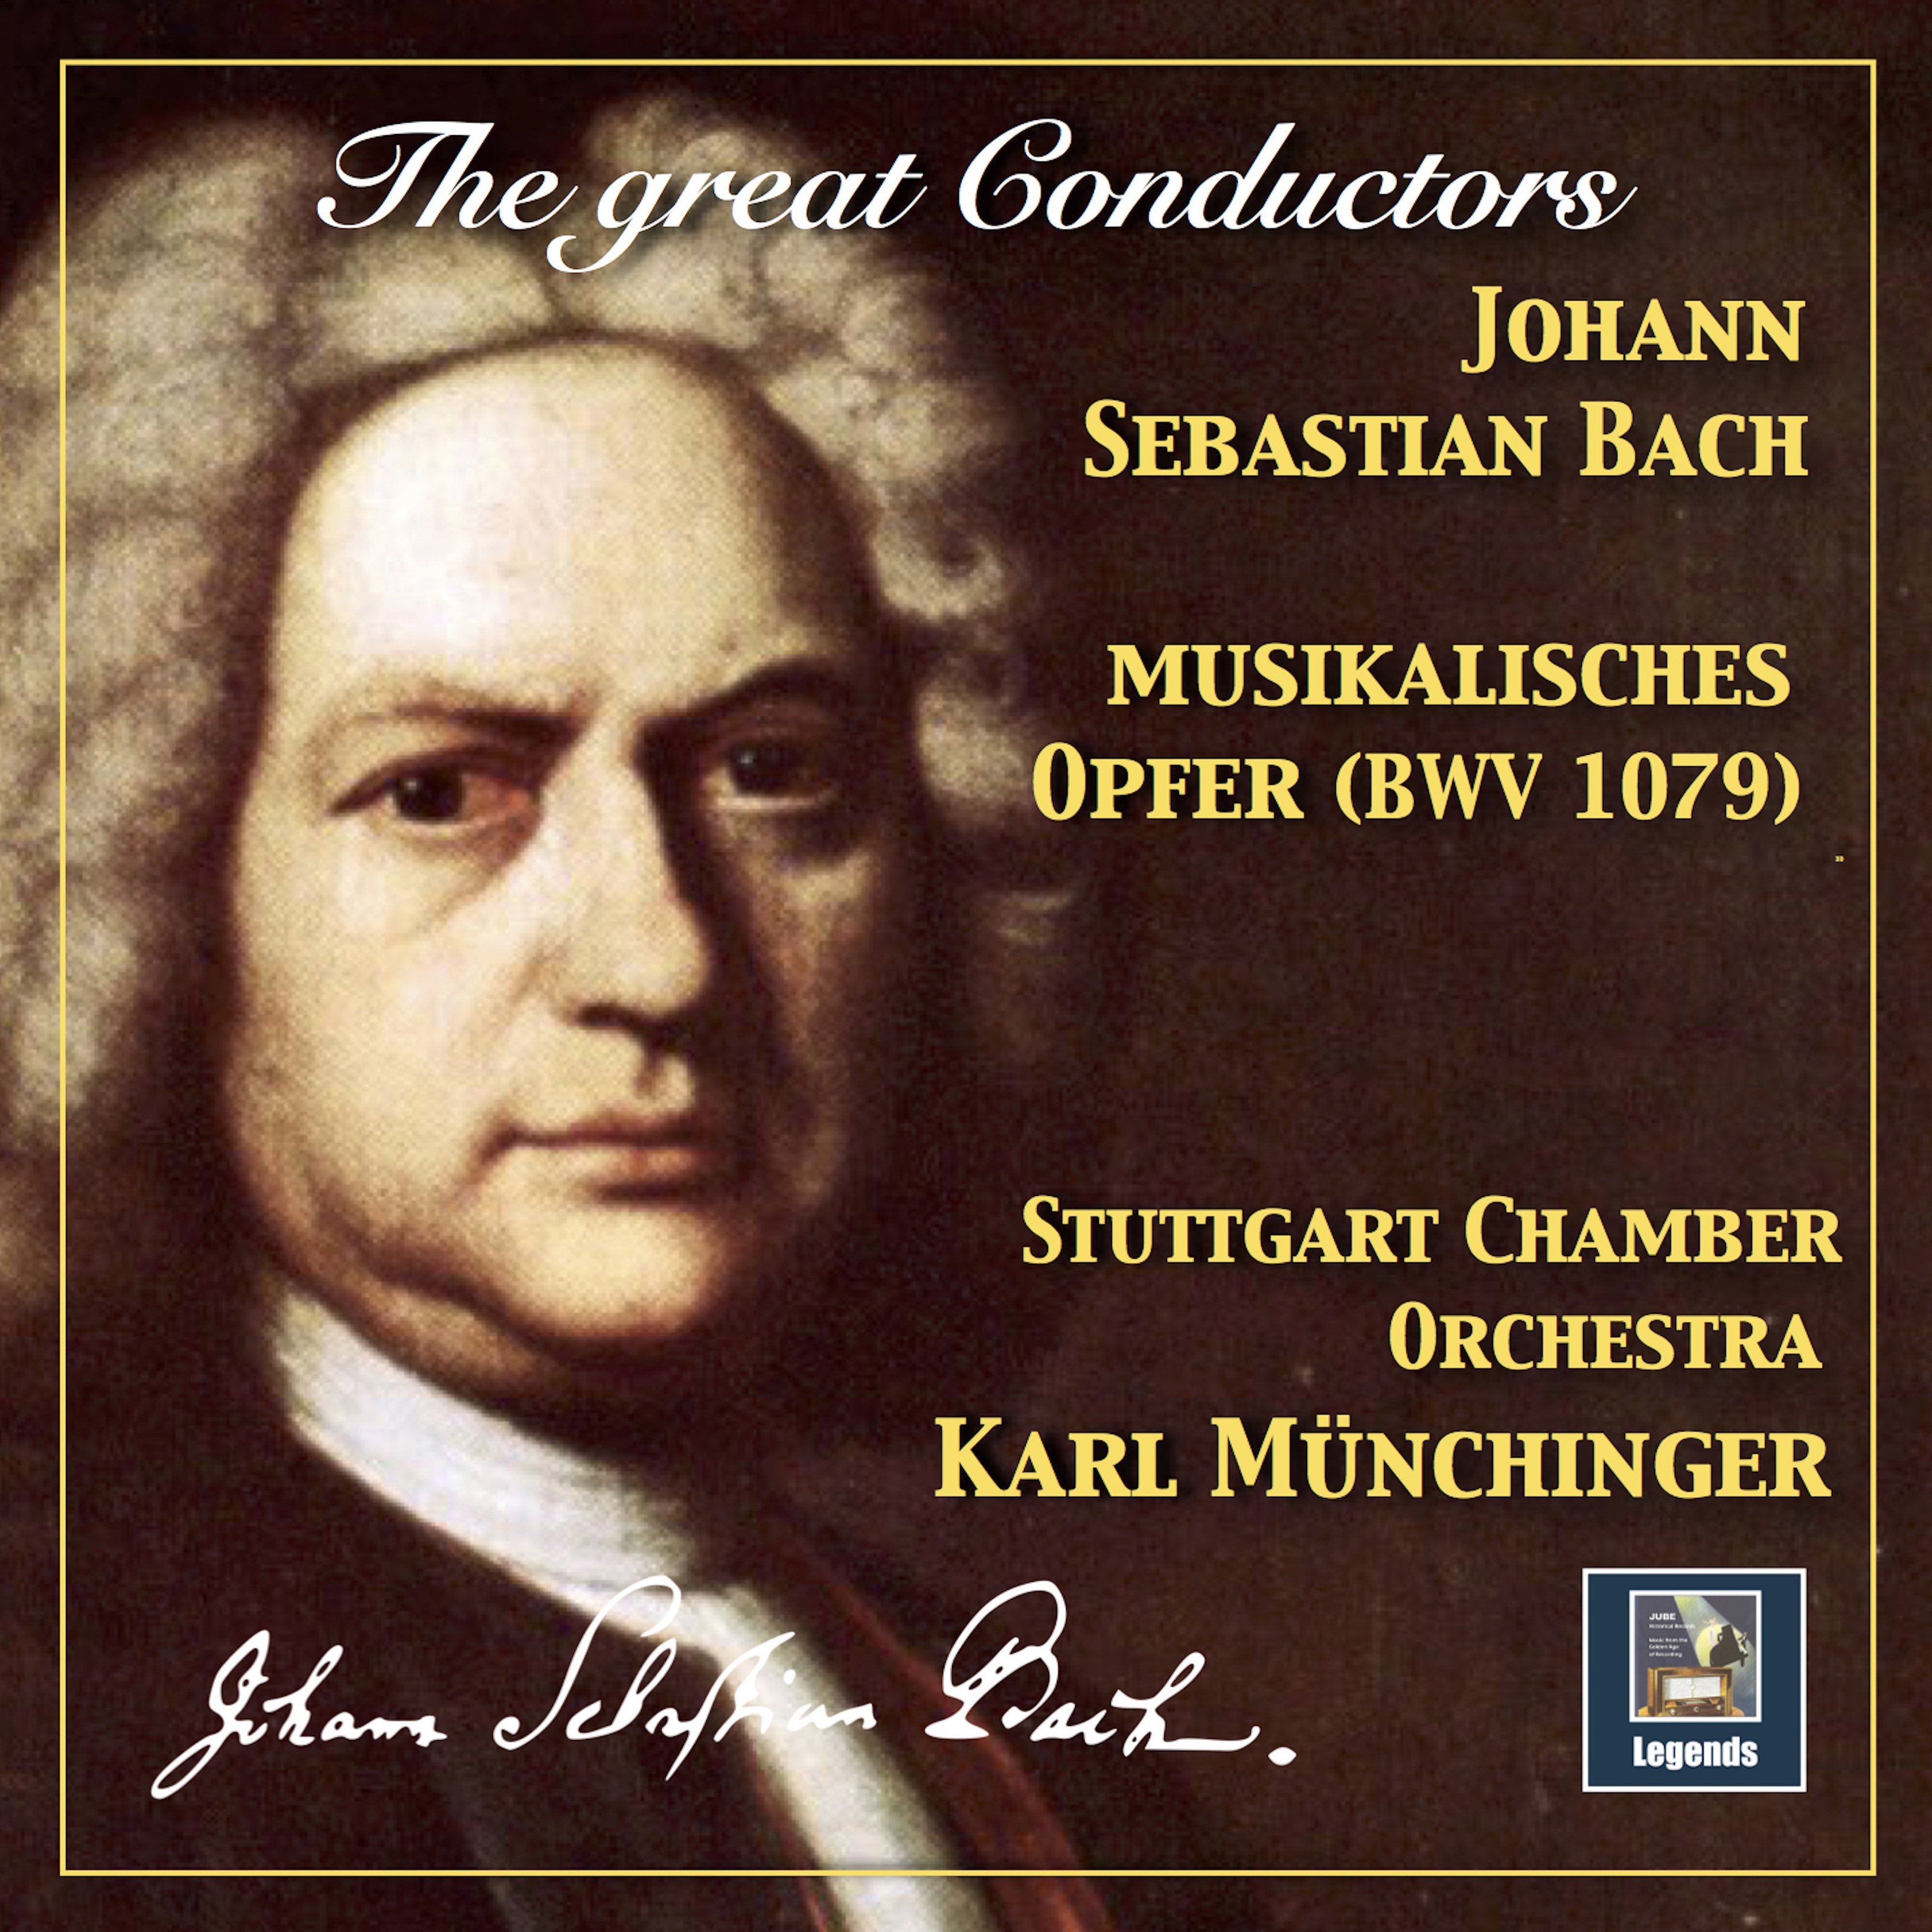 Musikalisches Opfer, BWV 1079 Arr. K. Mü nchinger for Chamber Orchestra: Canon a 4